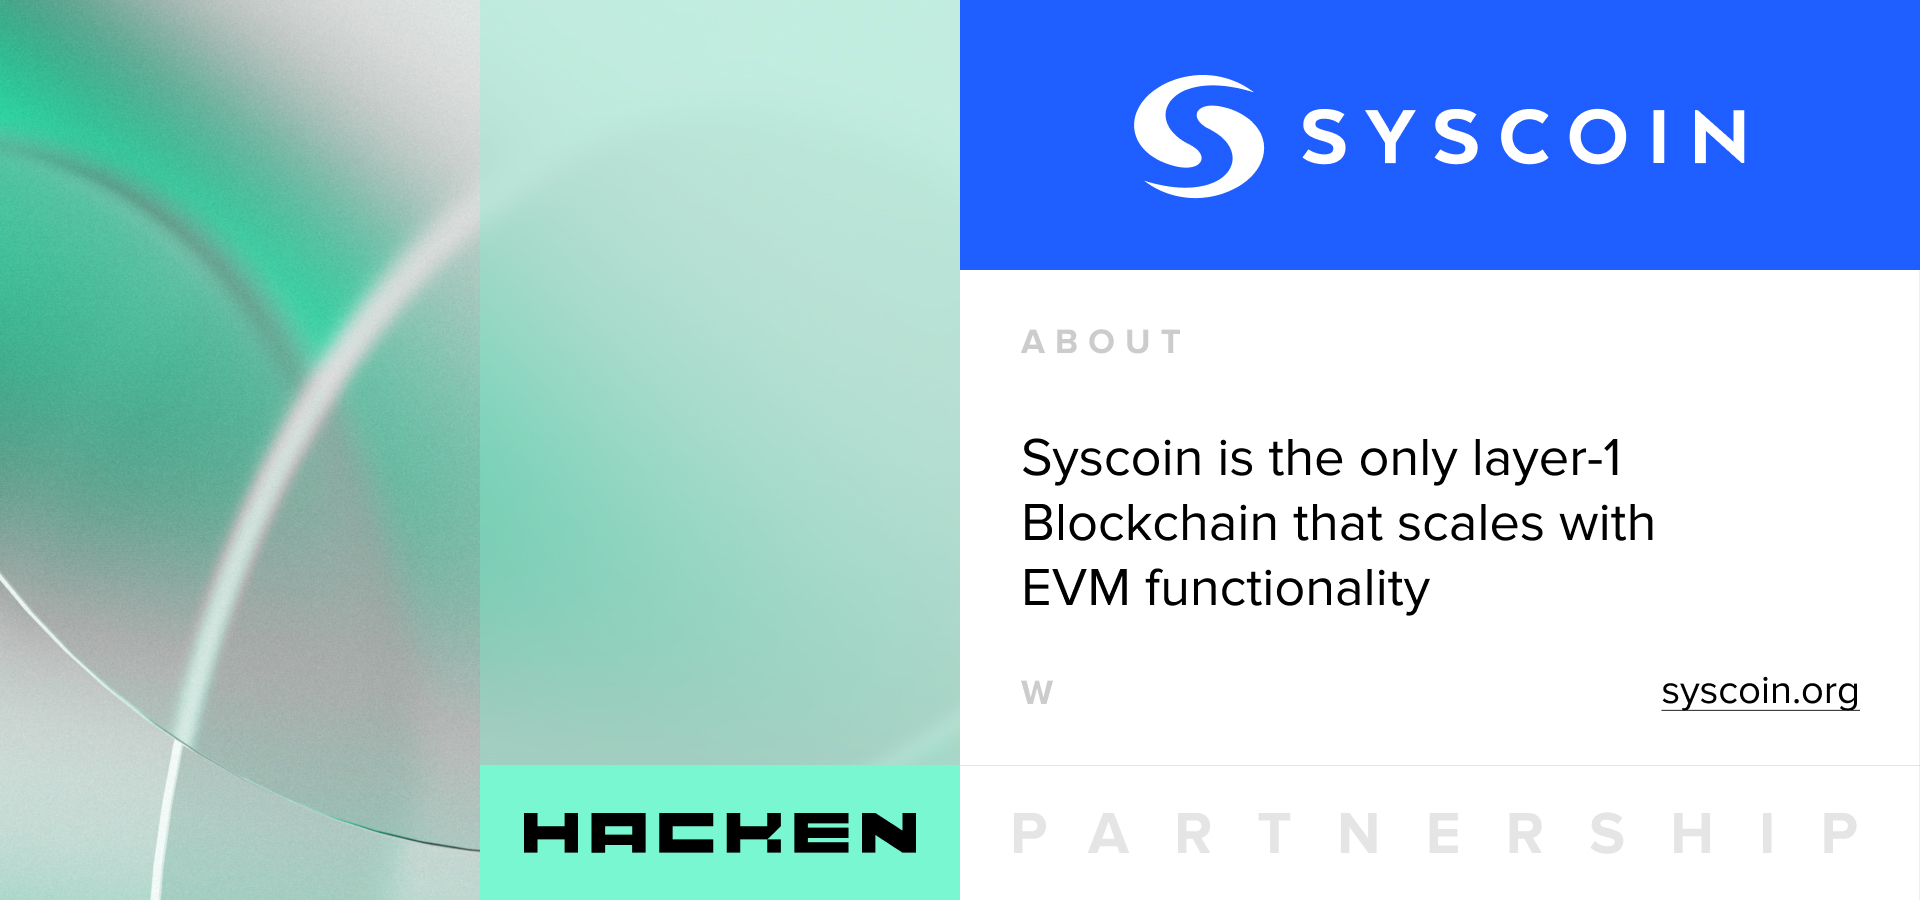 Syscoin partners with Hacken to ensure secure deployment of L2 protocol